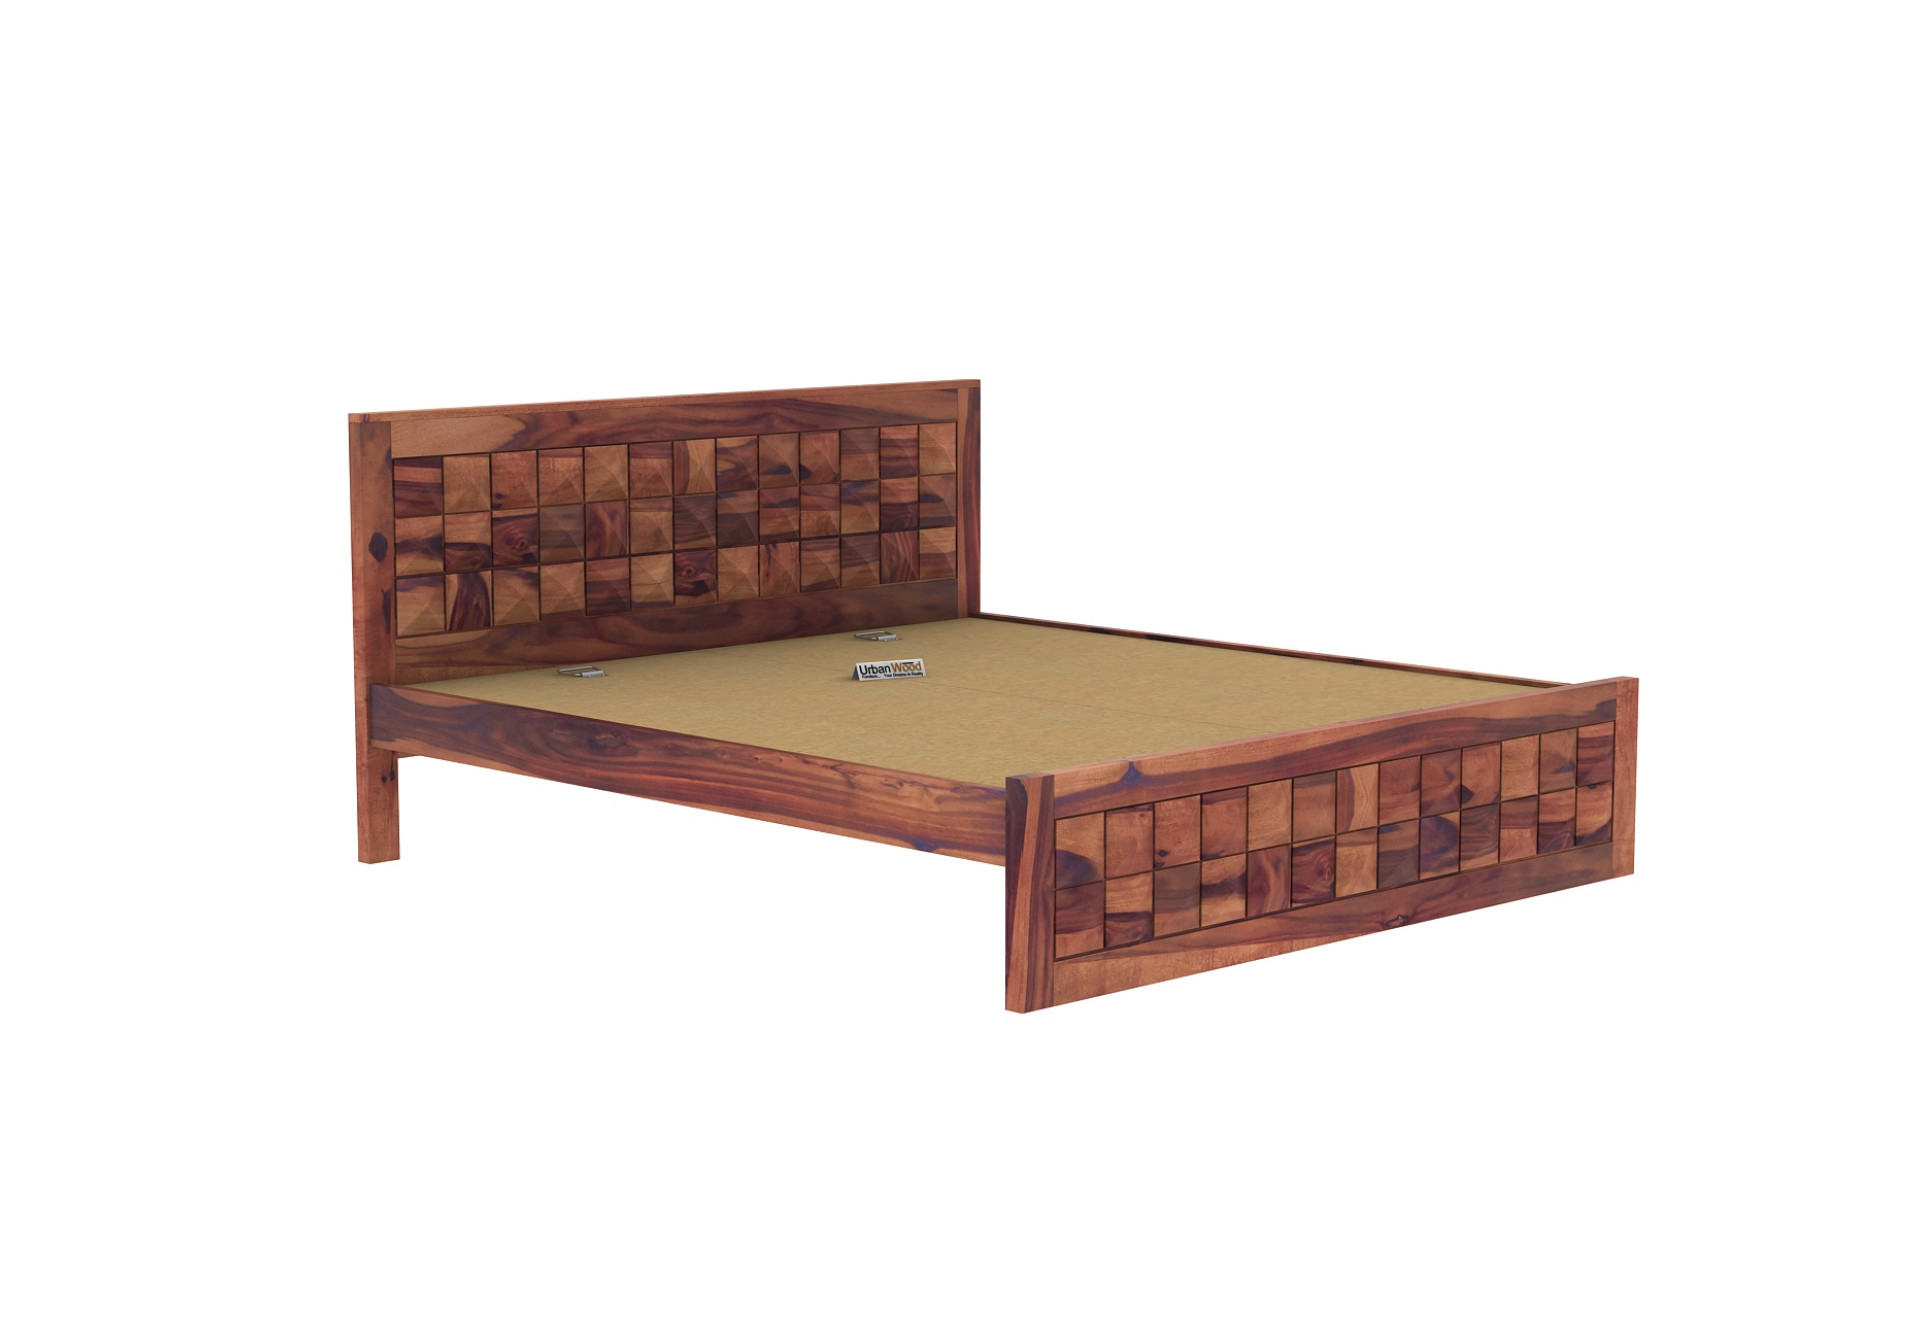 Morgana Without Storage Bed (Queen Size, Teak Finish)